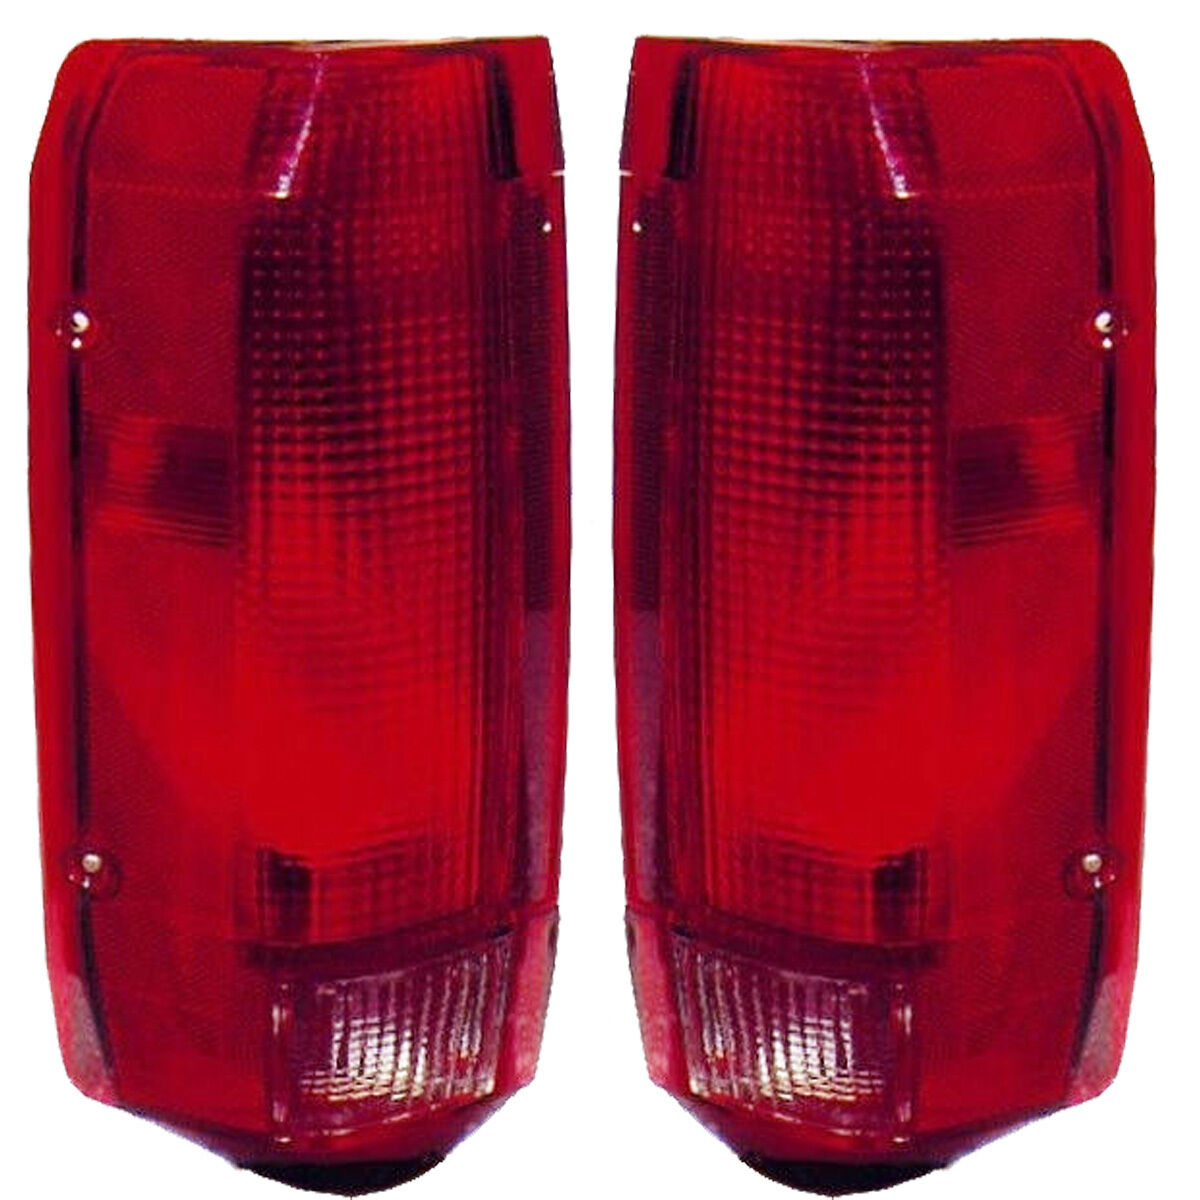 New Pair of Tail Lights Left & Right Fits 1992-1996 Bronco & F150 Pickup